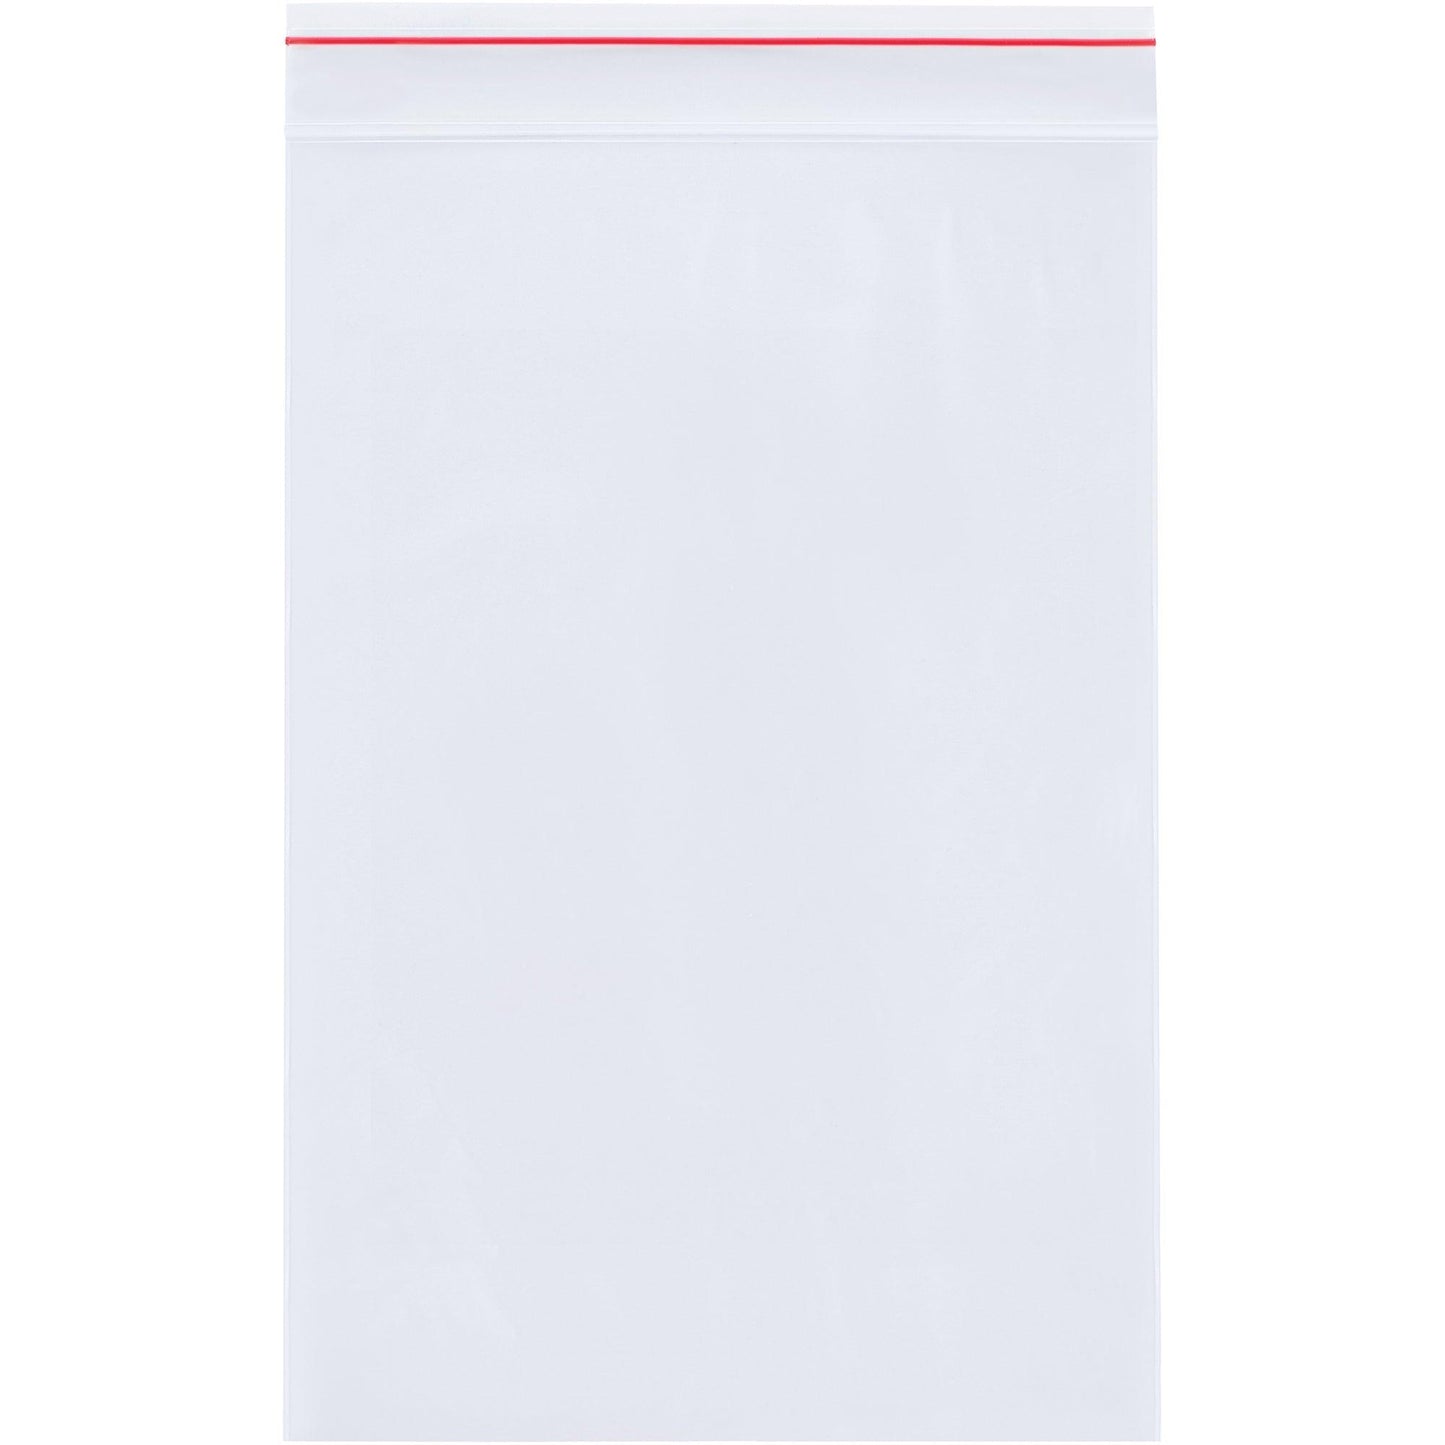 28 x 30" - 6 Mil Reclosable Poly Bags - PB3891